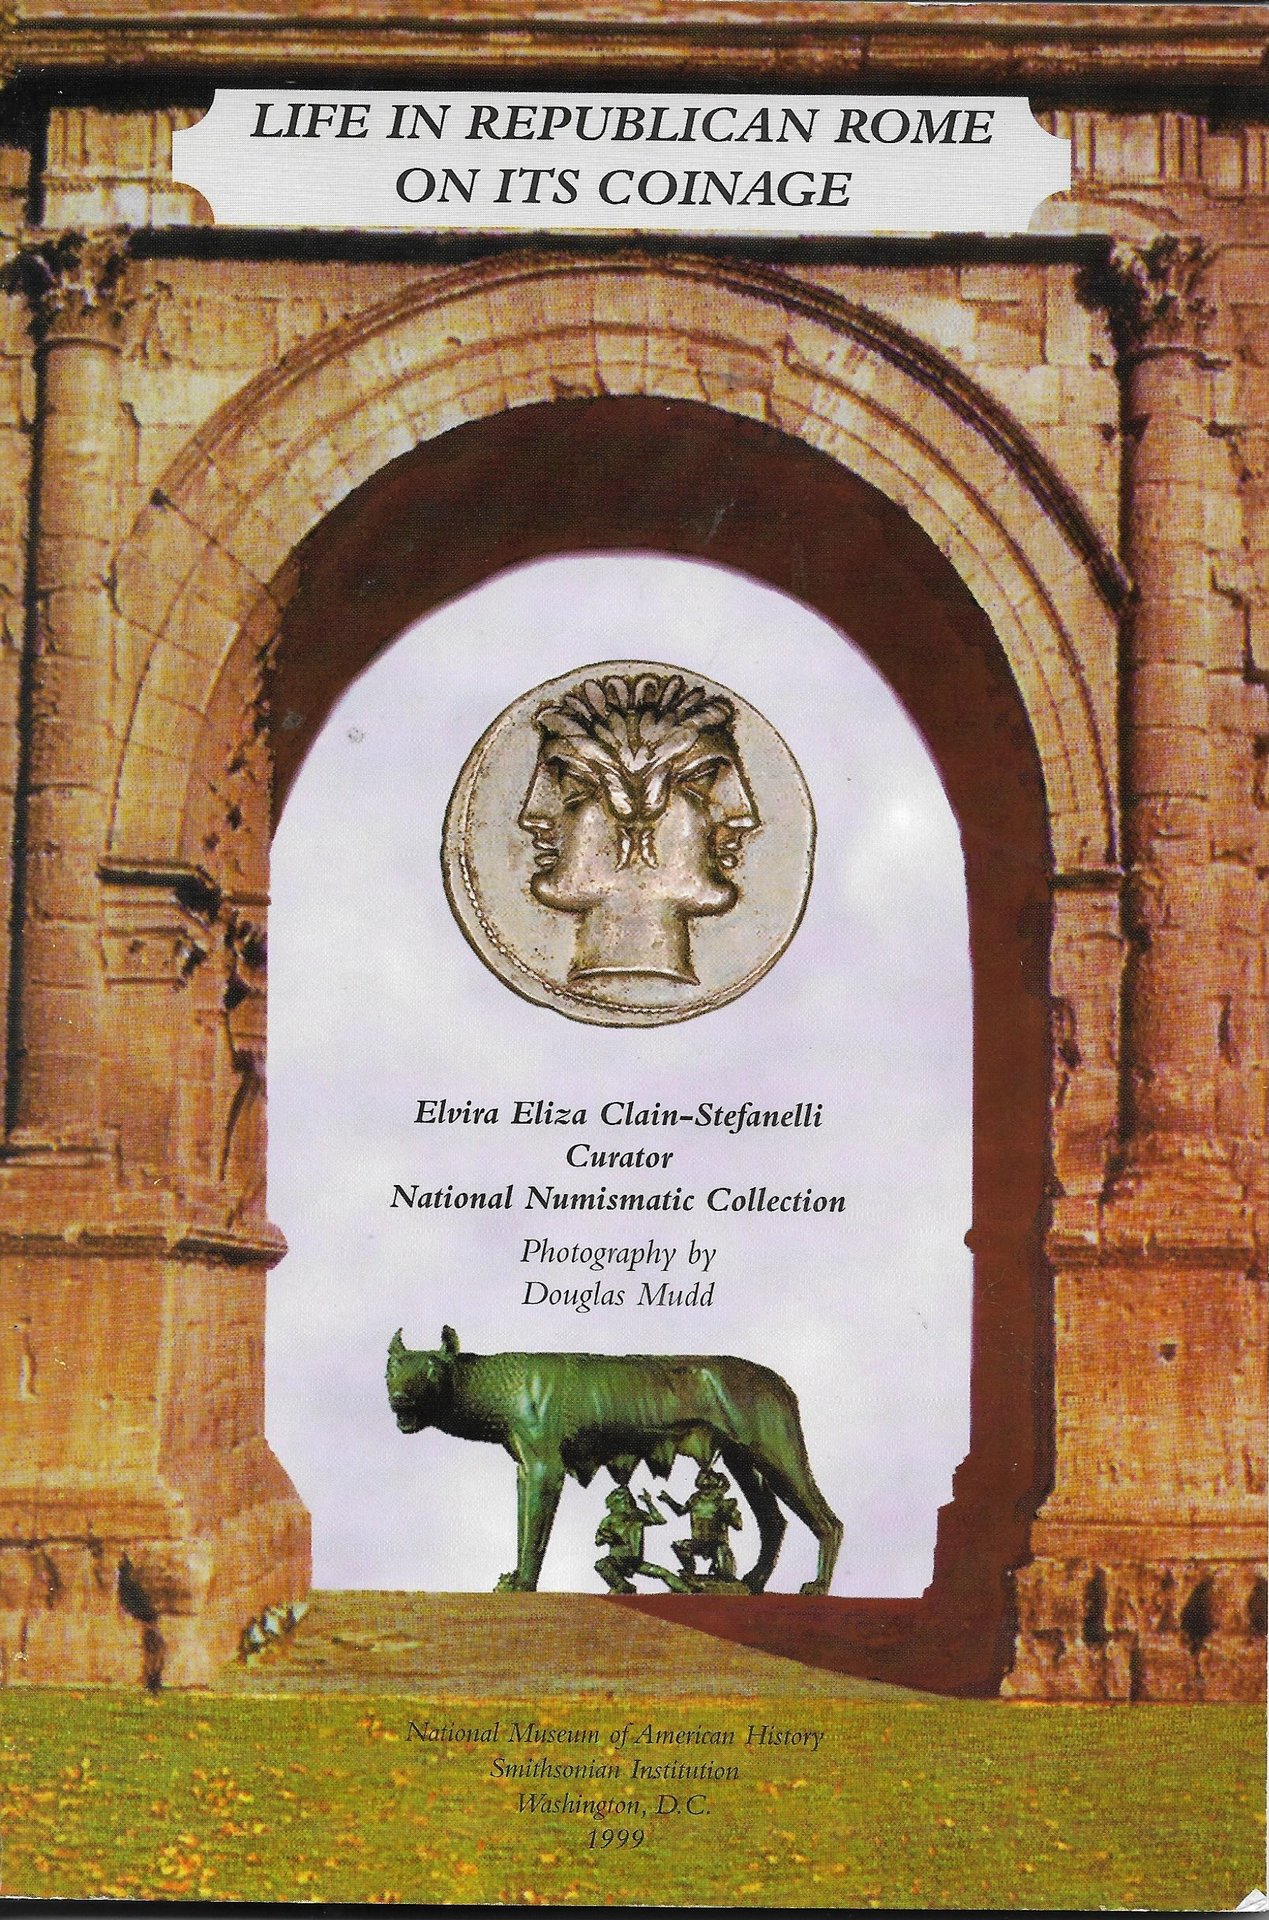 Cover of Clain-Stefanelli book on Roman Republican coins.jpg